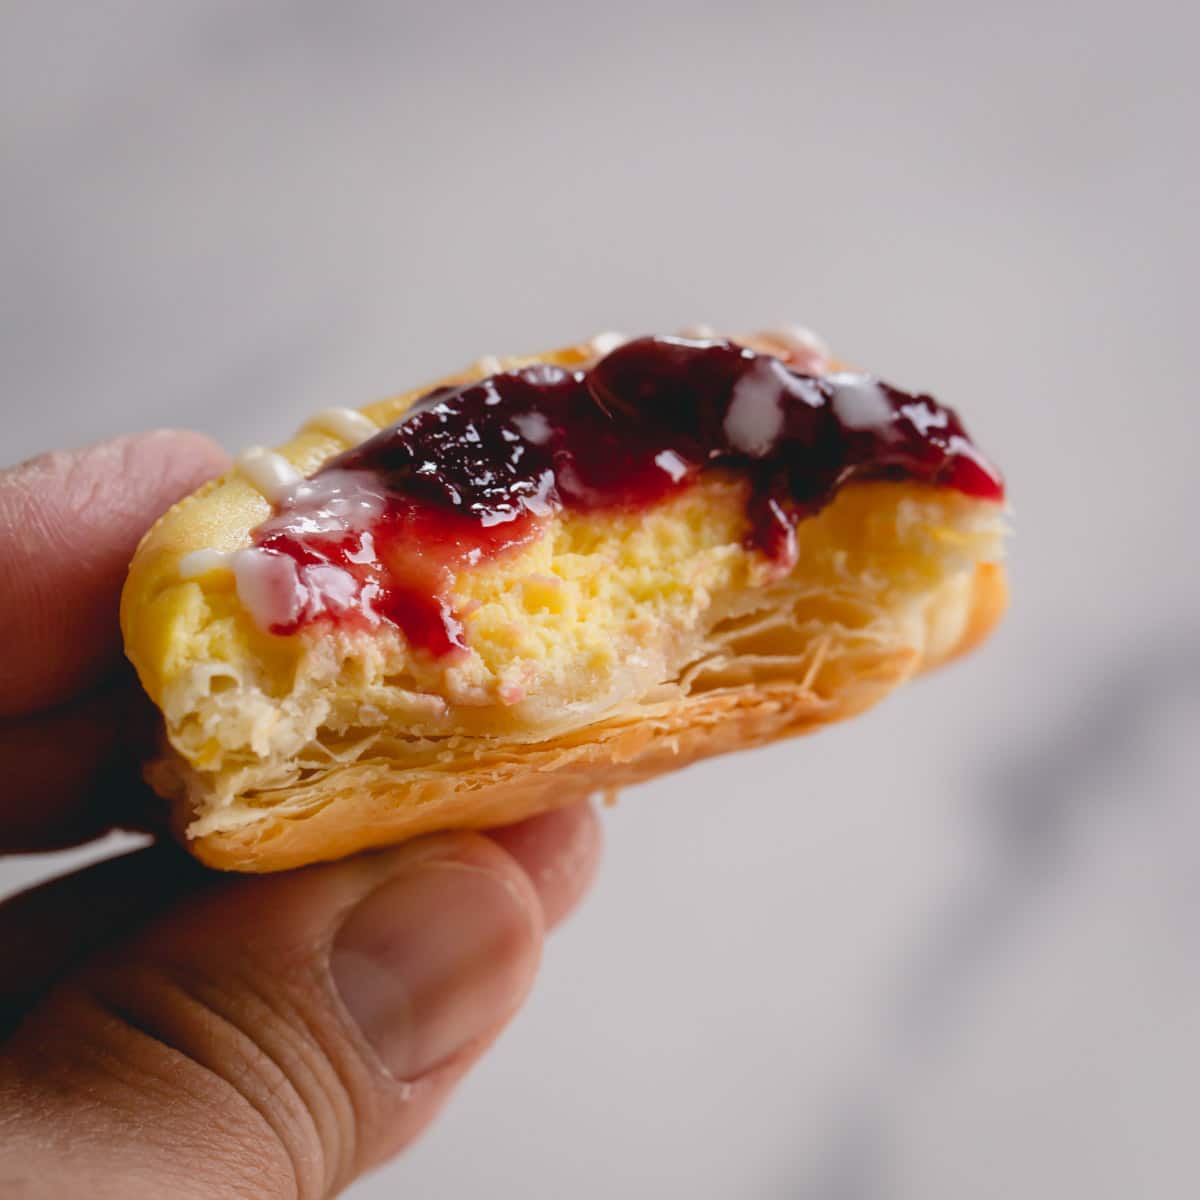 A hand holding a cherry danish with a bite missing exposing the cream cheese center.